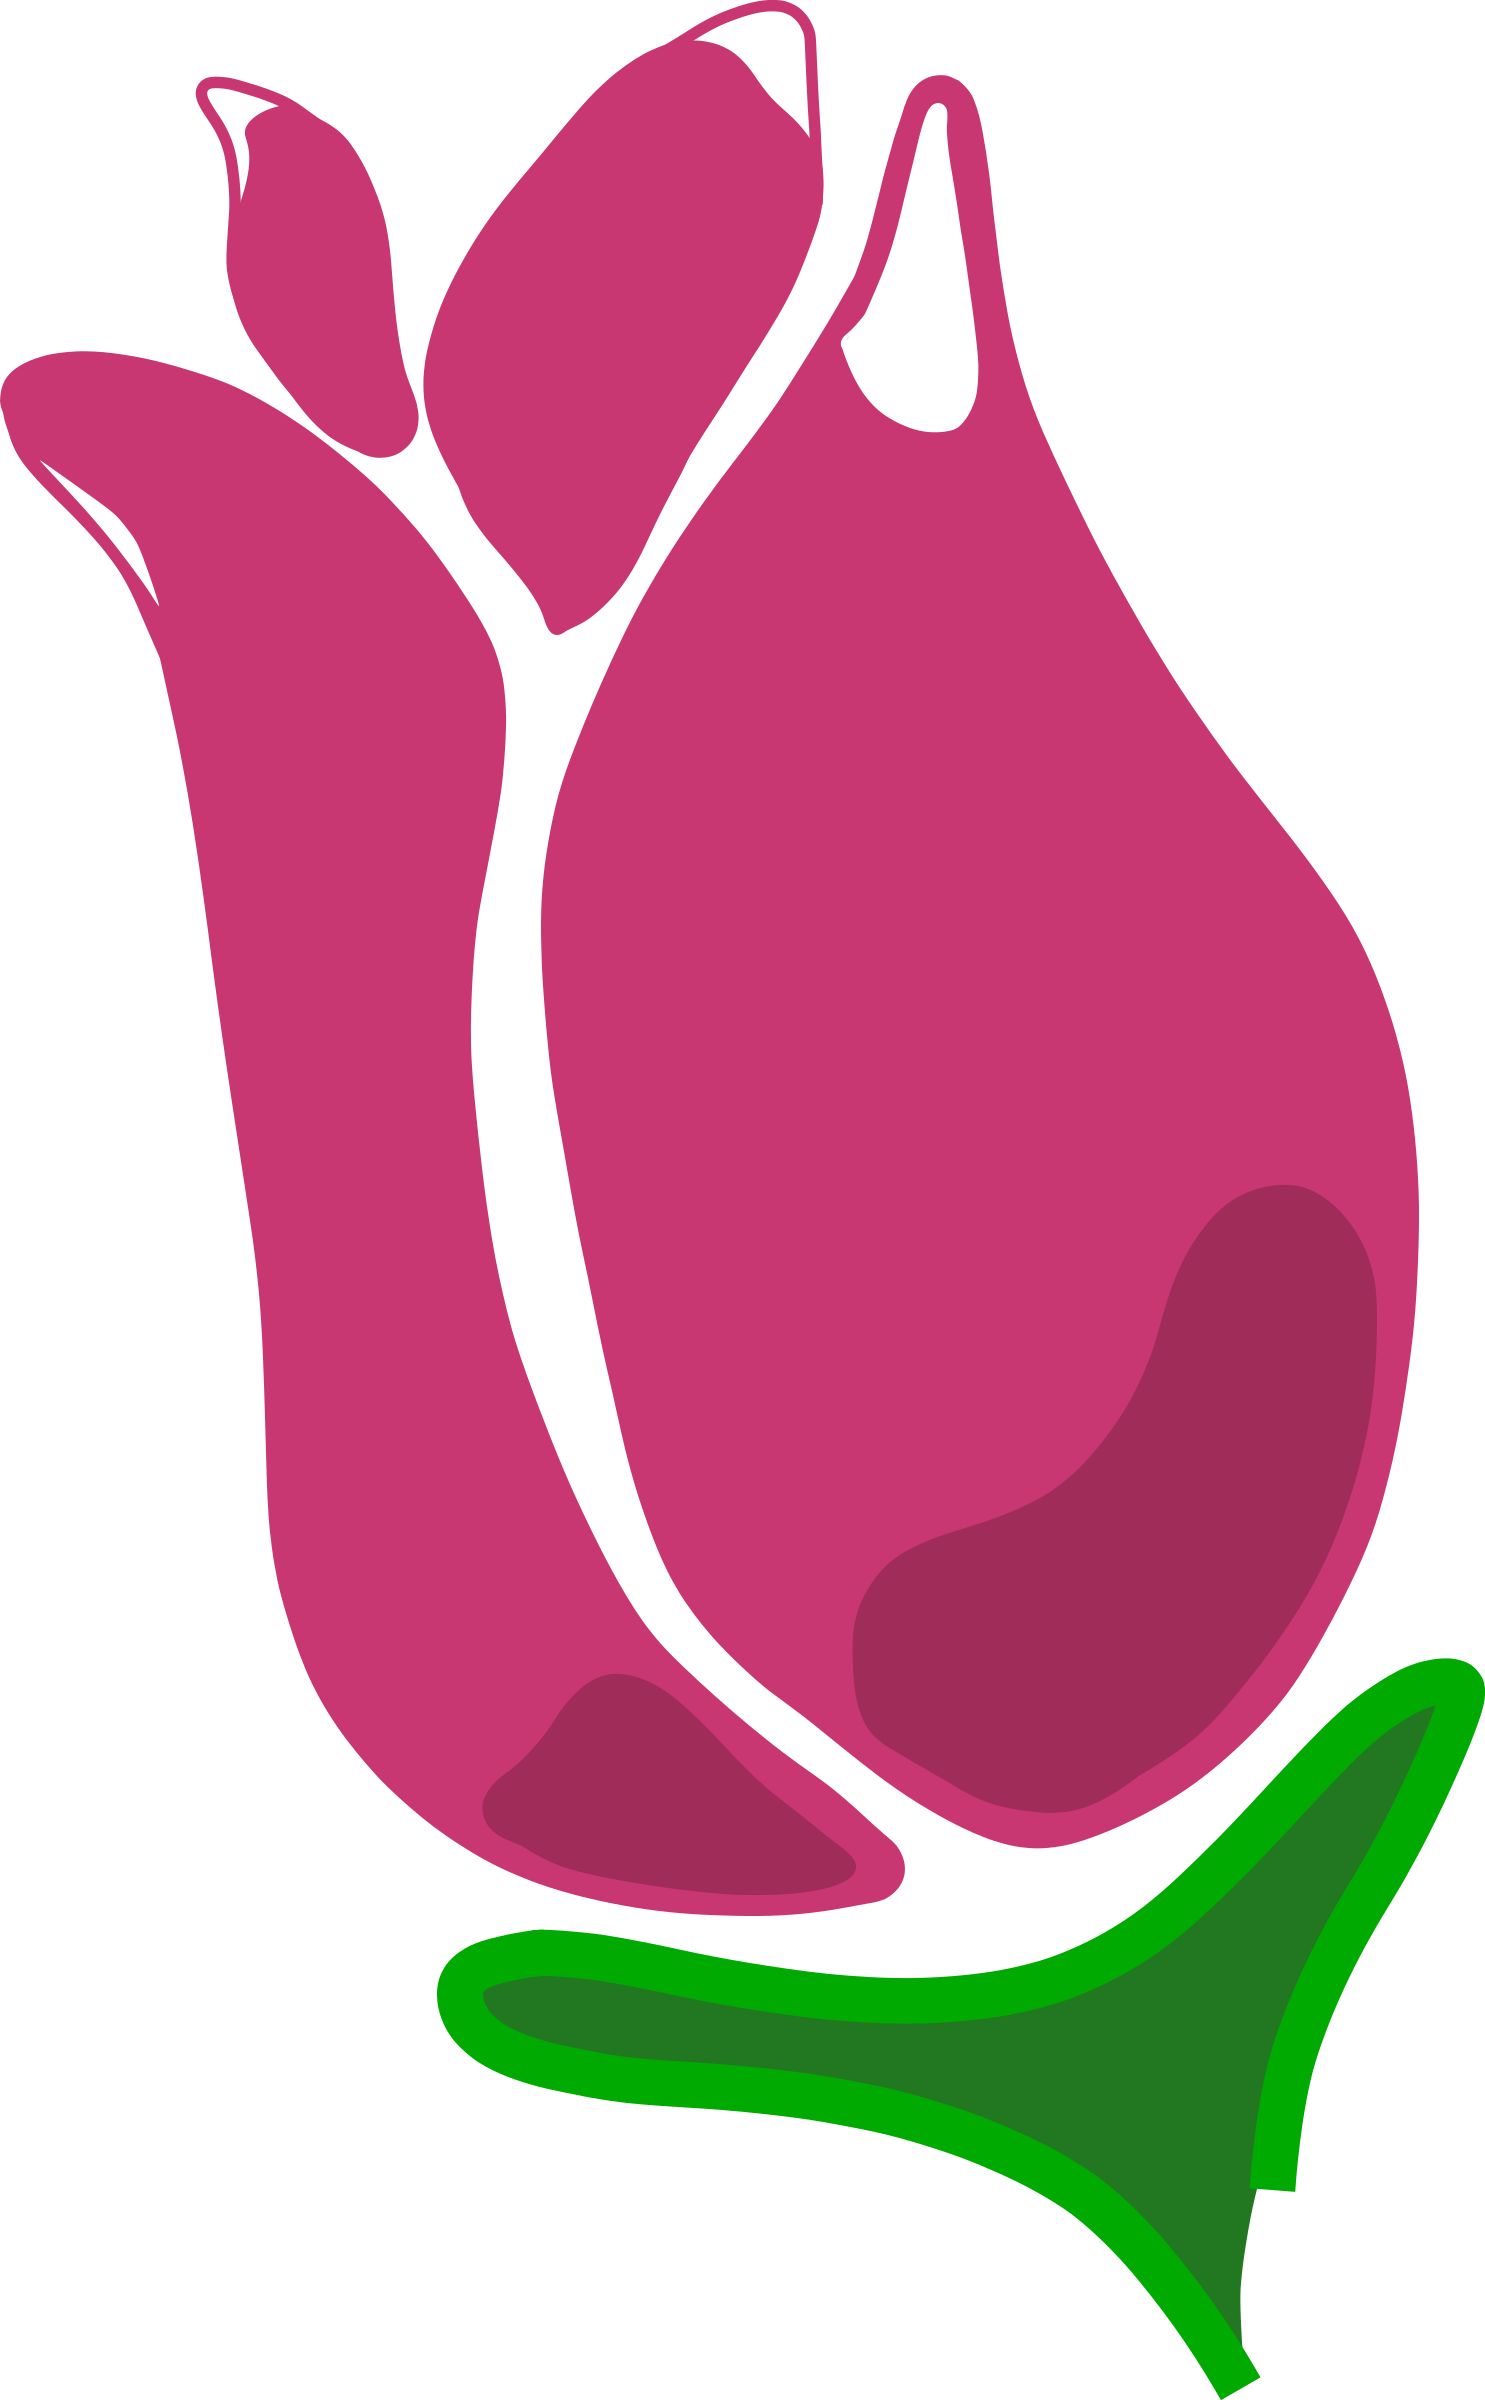 pear clipart rose